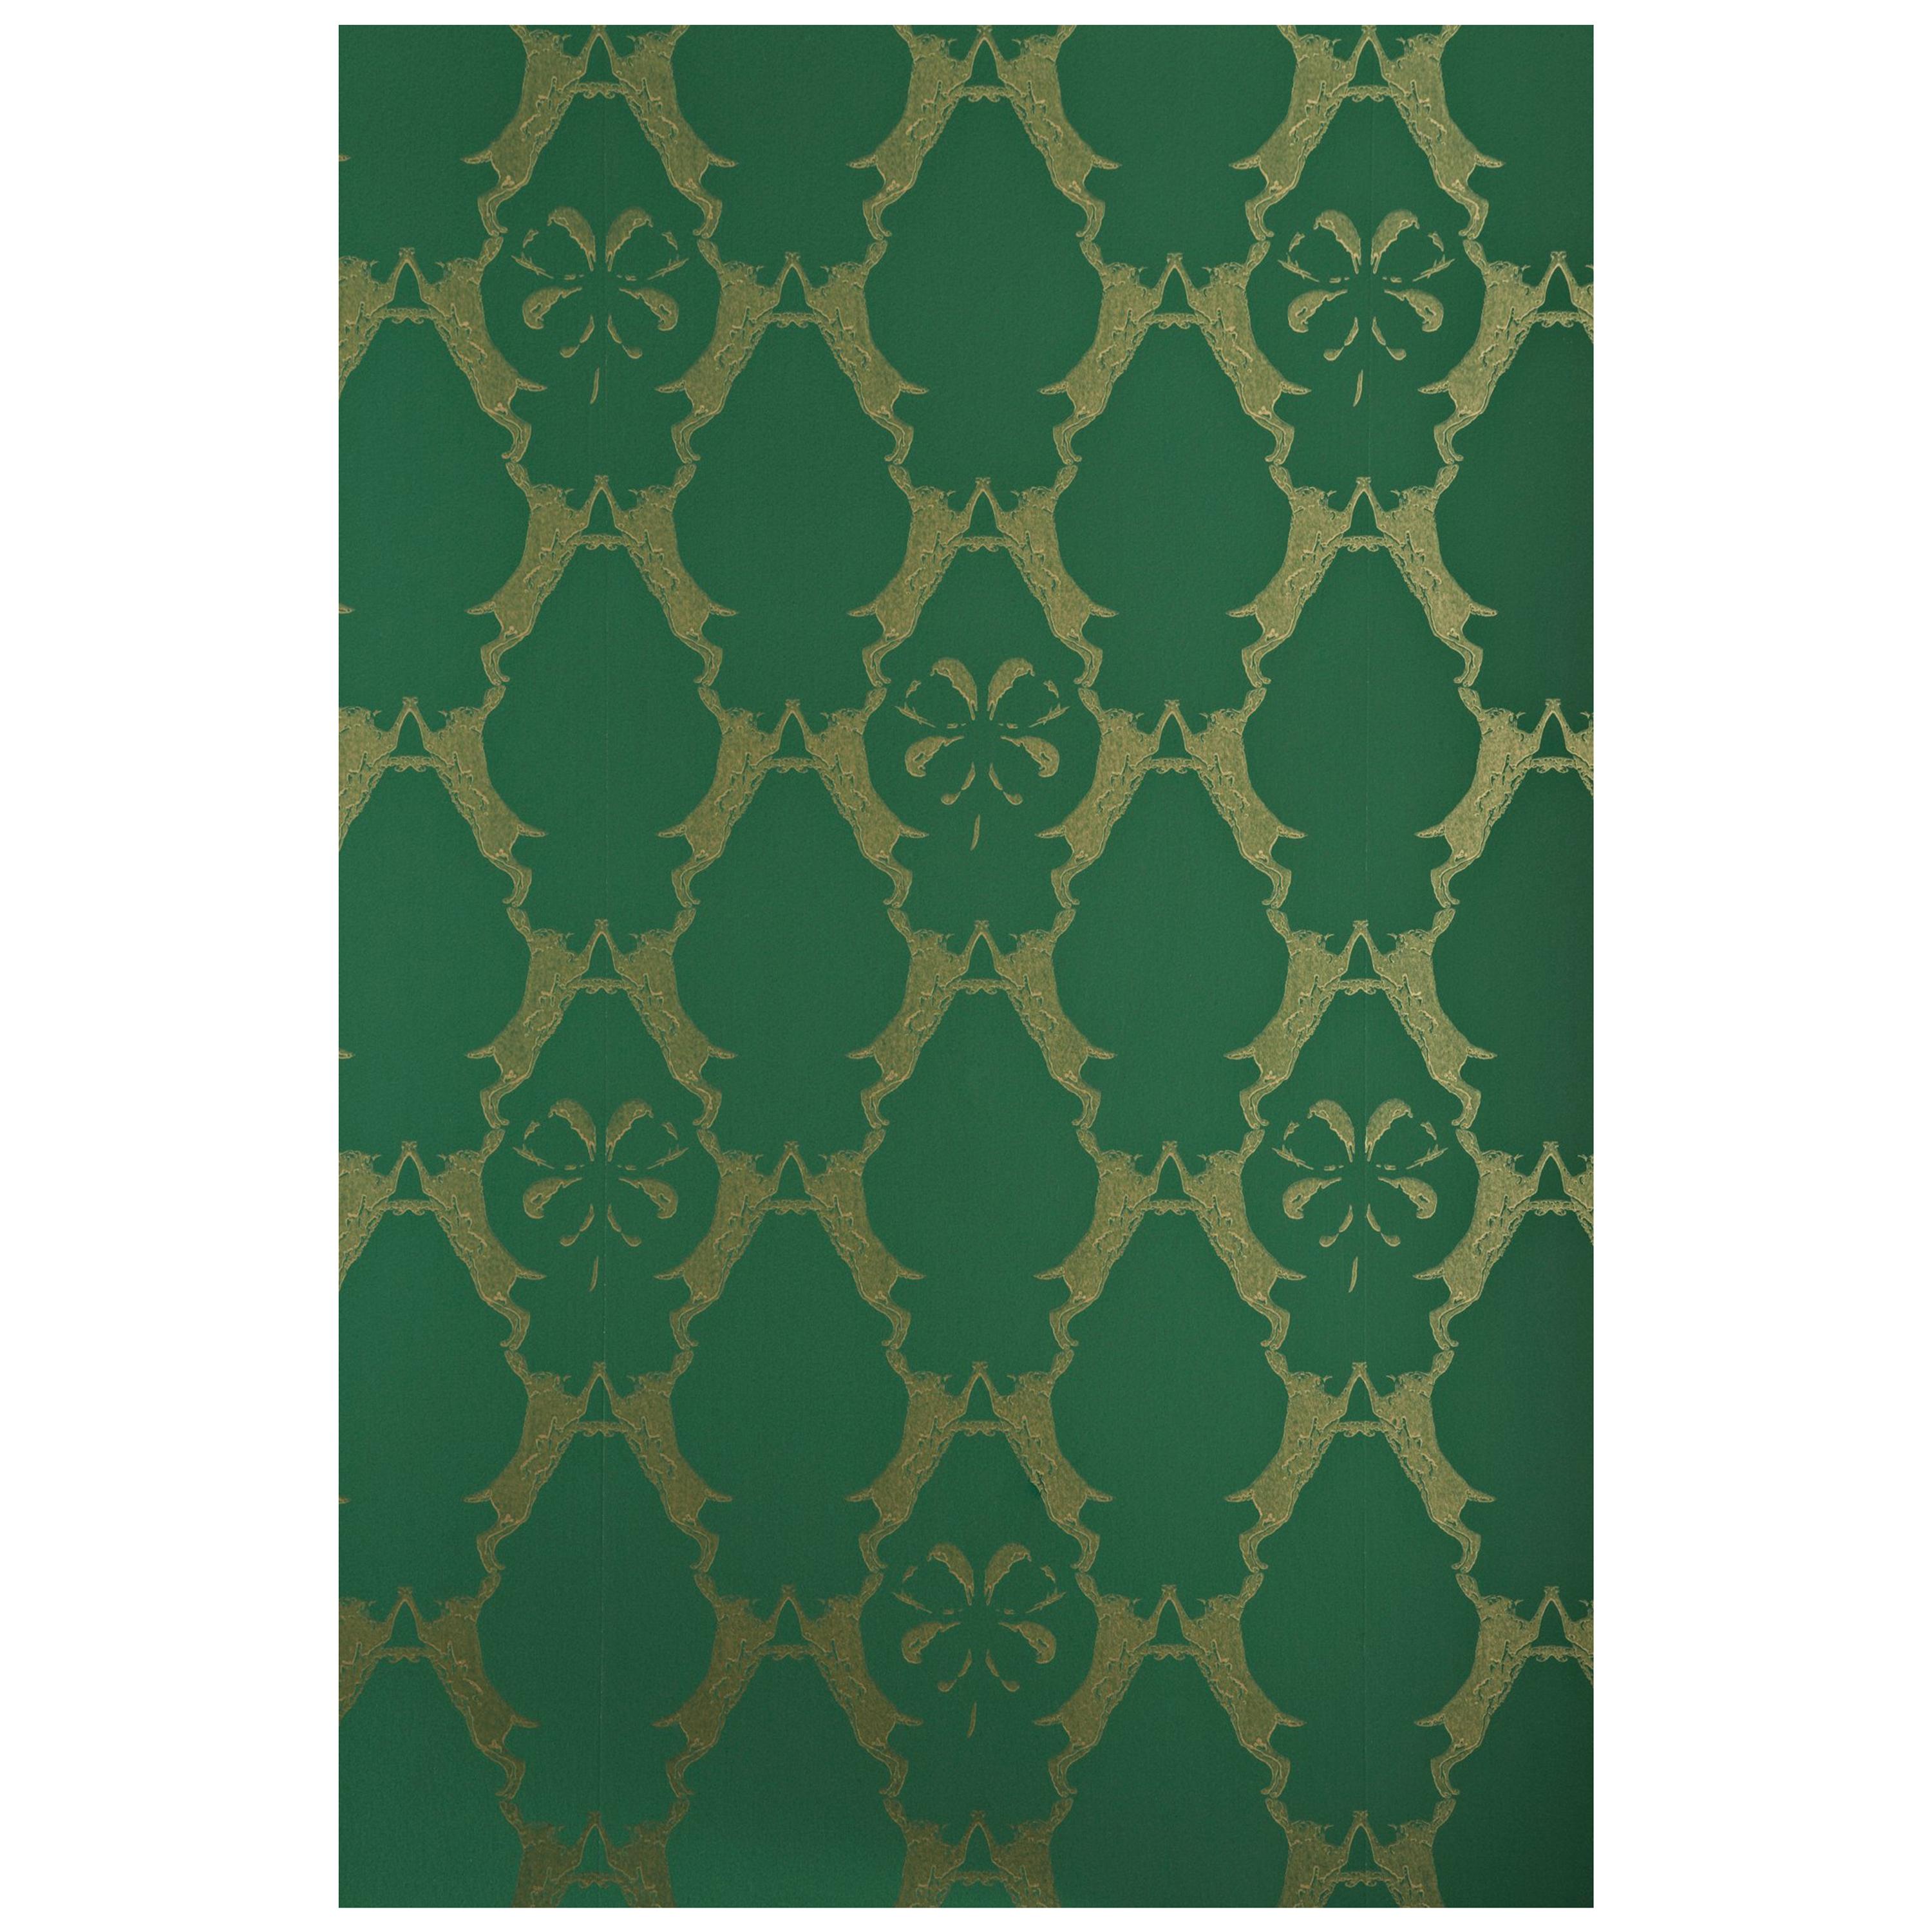 'Boxing Hares' Contemporary, Traditional Wallpaper in Billiard Green For Sale